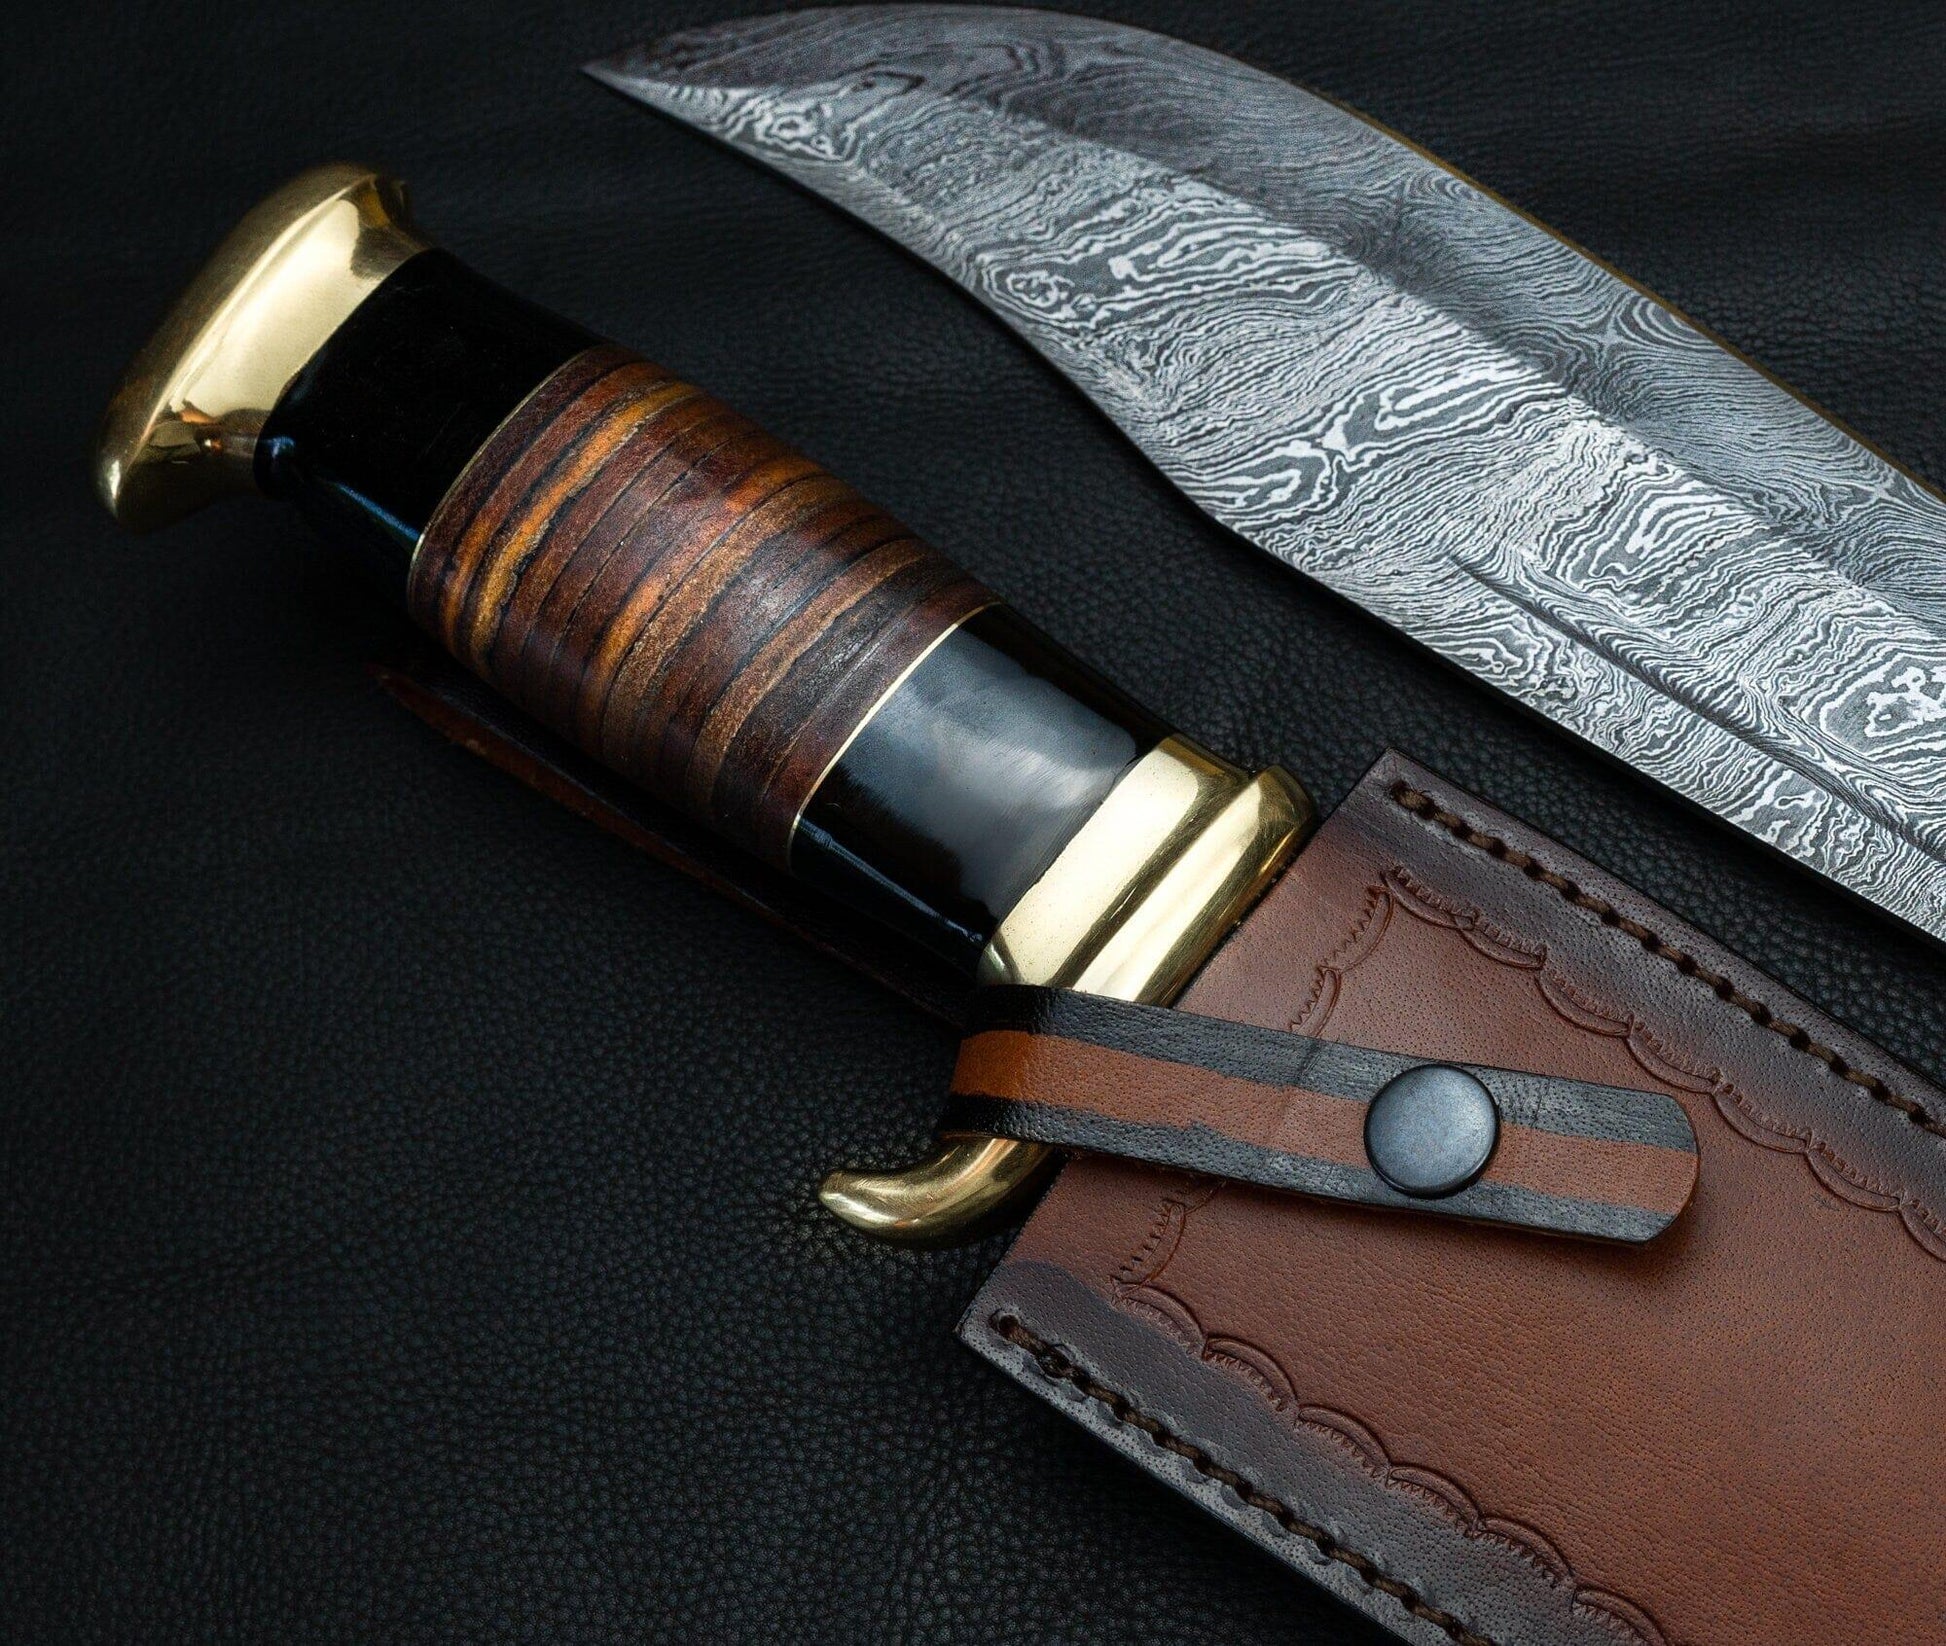 16 Massive Damascus Bowie Hunting Knife – MORF STEEL